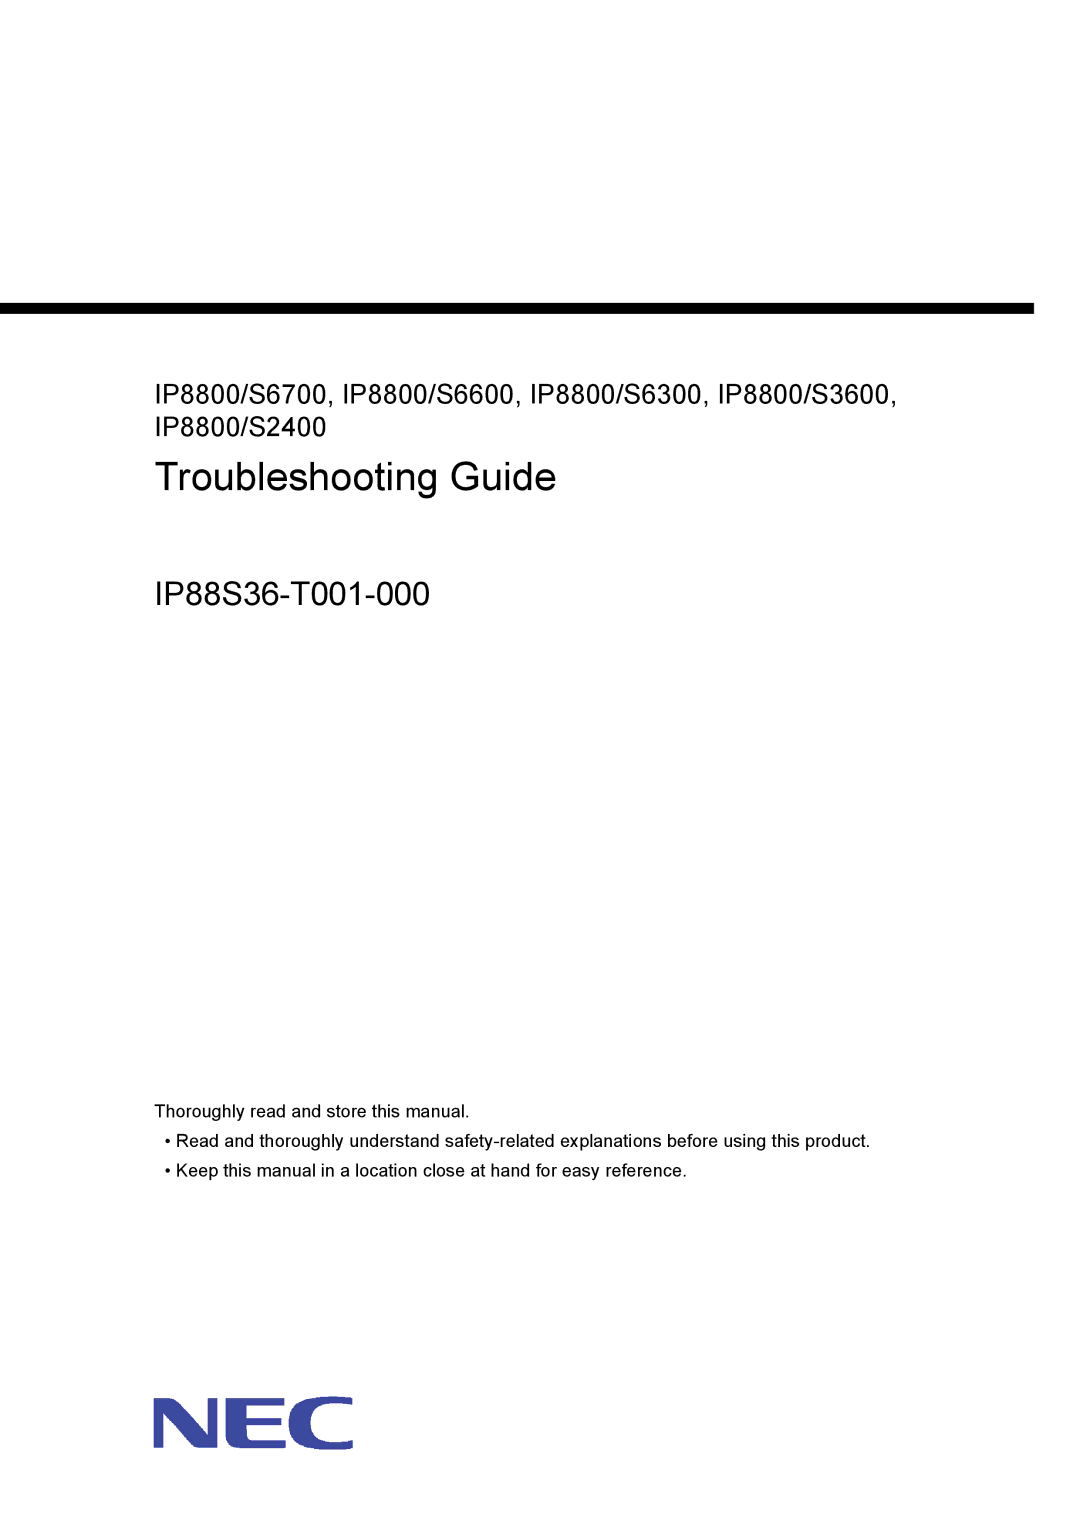 NEC IP8800/S3600, IP8800/S6600, IP8800/S2400, IP8800/S6700, IP8800/S6300 manual Troubleshooting Guide, IP88S36-T001-000 